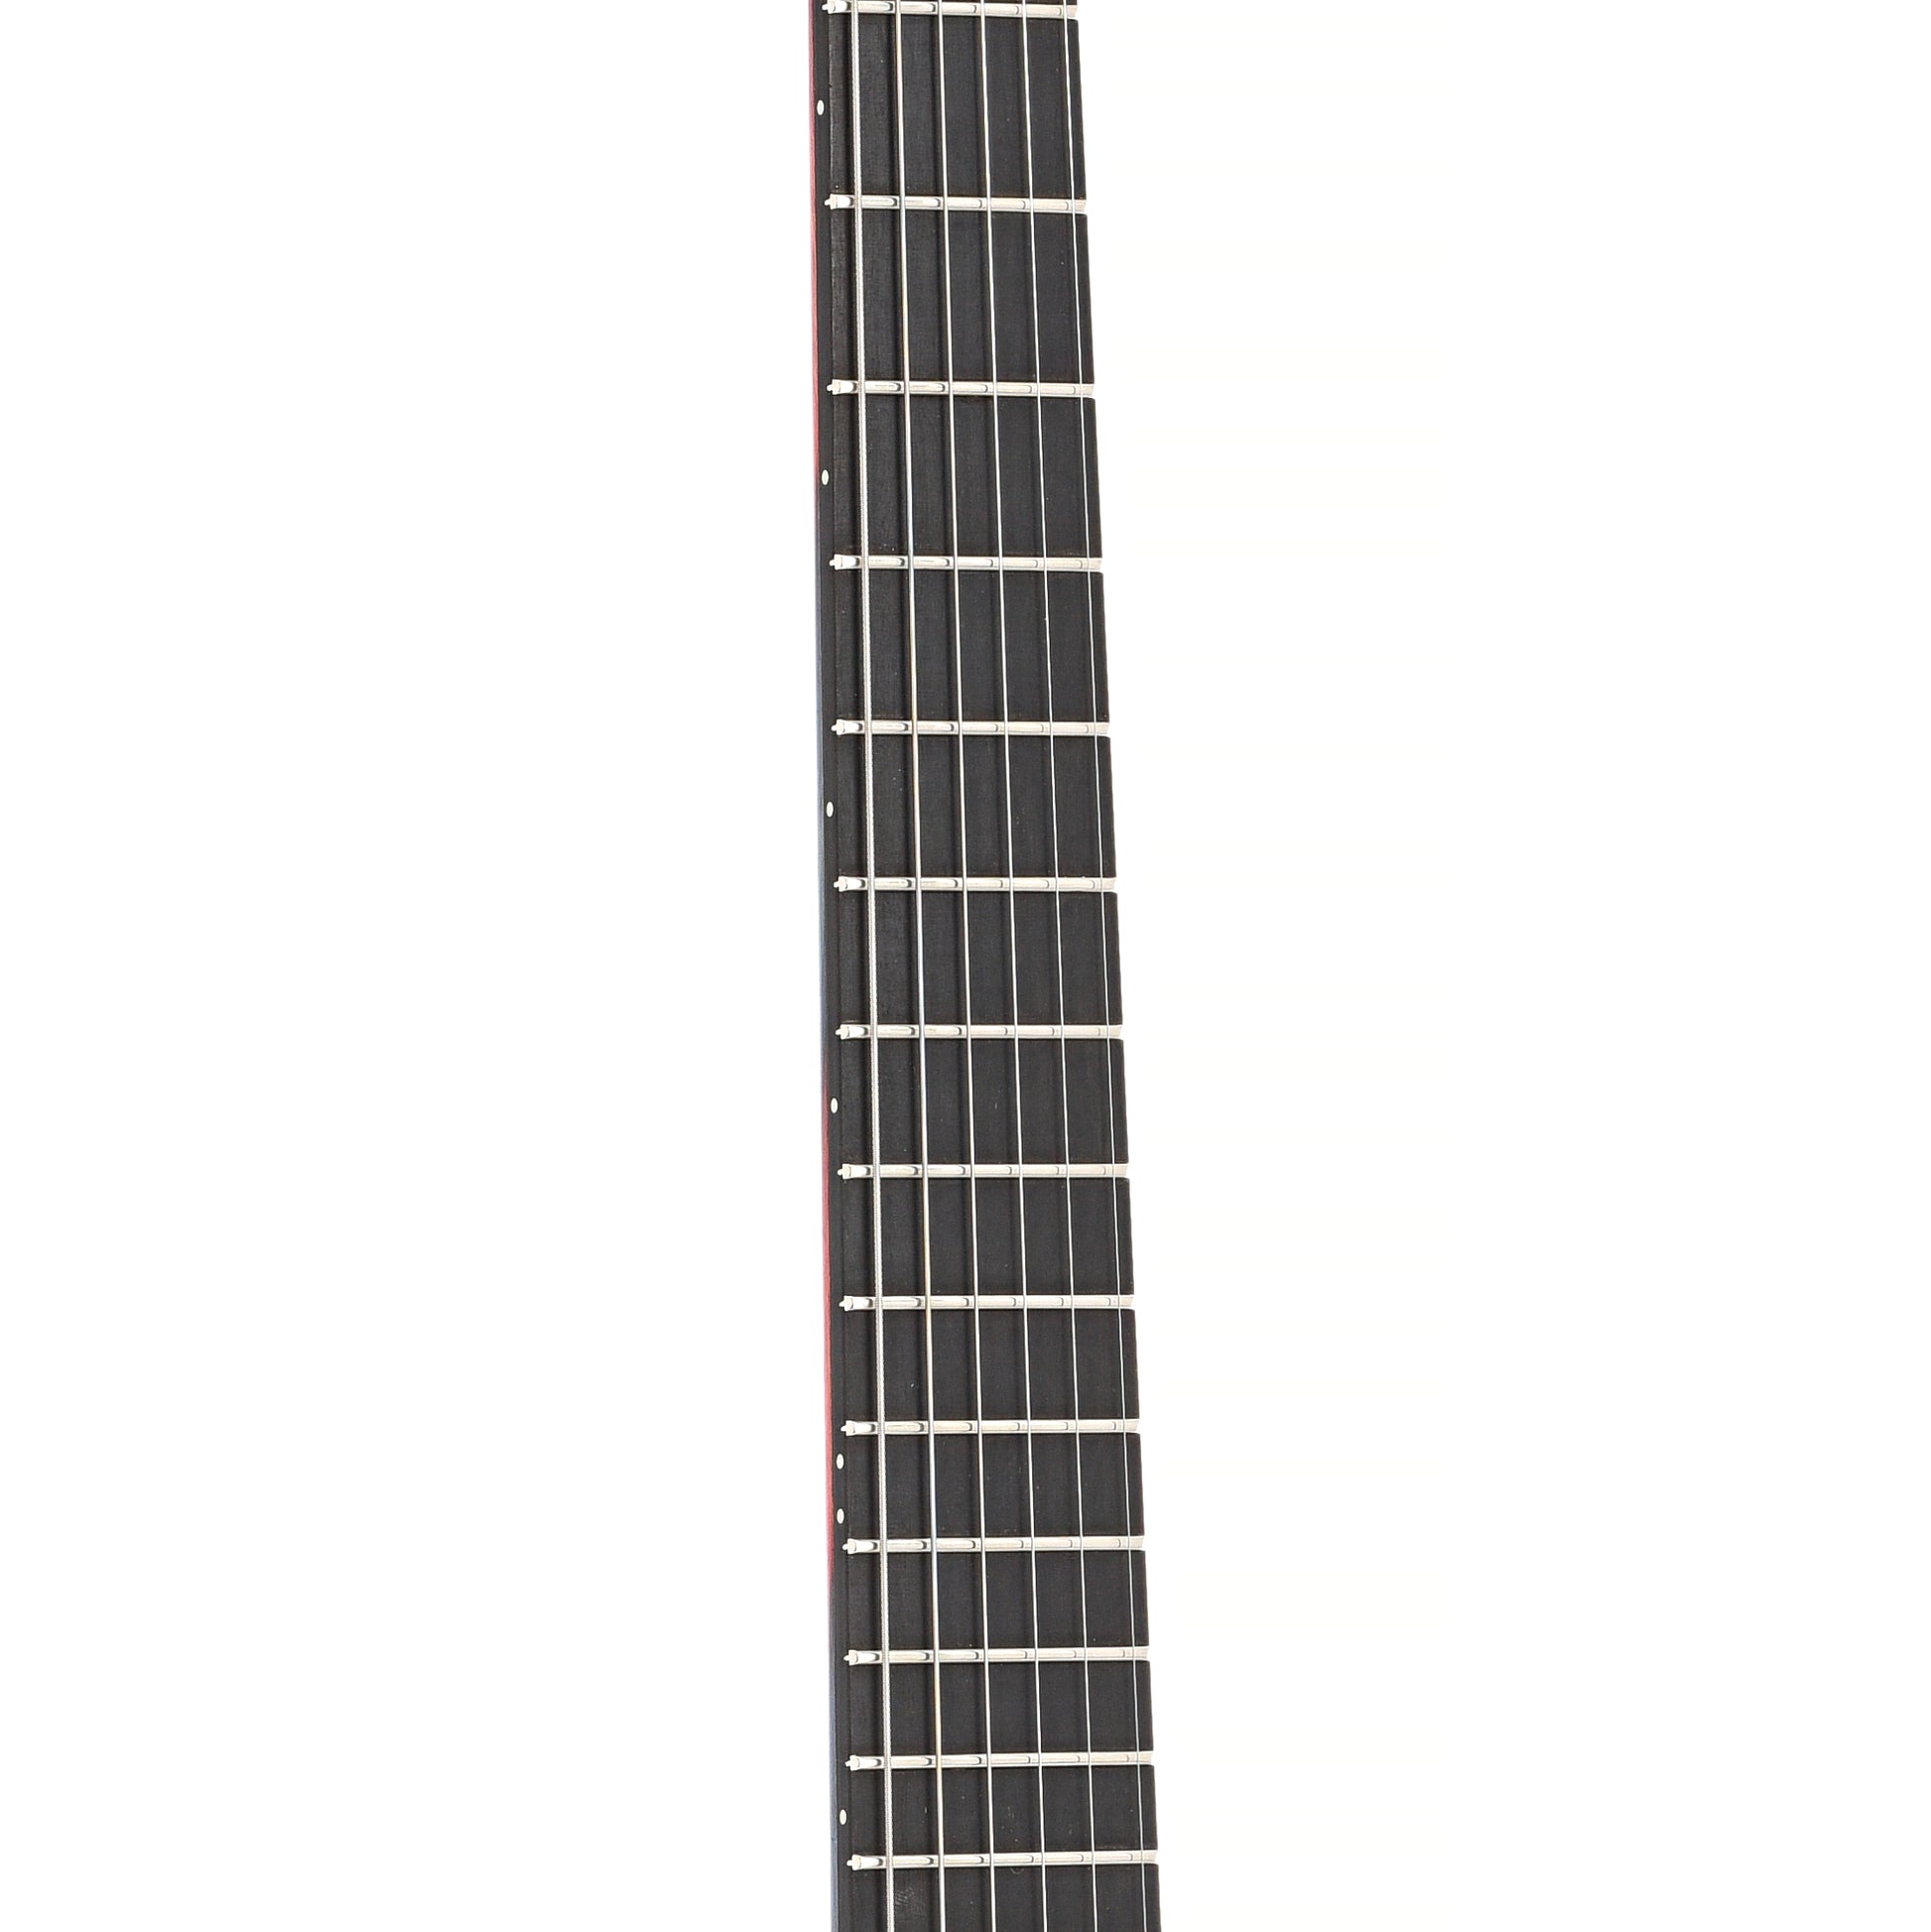 Fretboard of Gibson Zoot Suit SG Electric Guitar (2009)